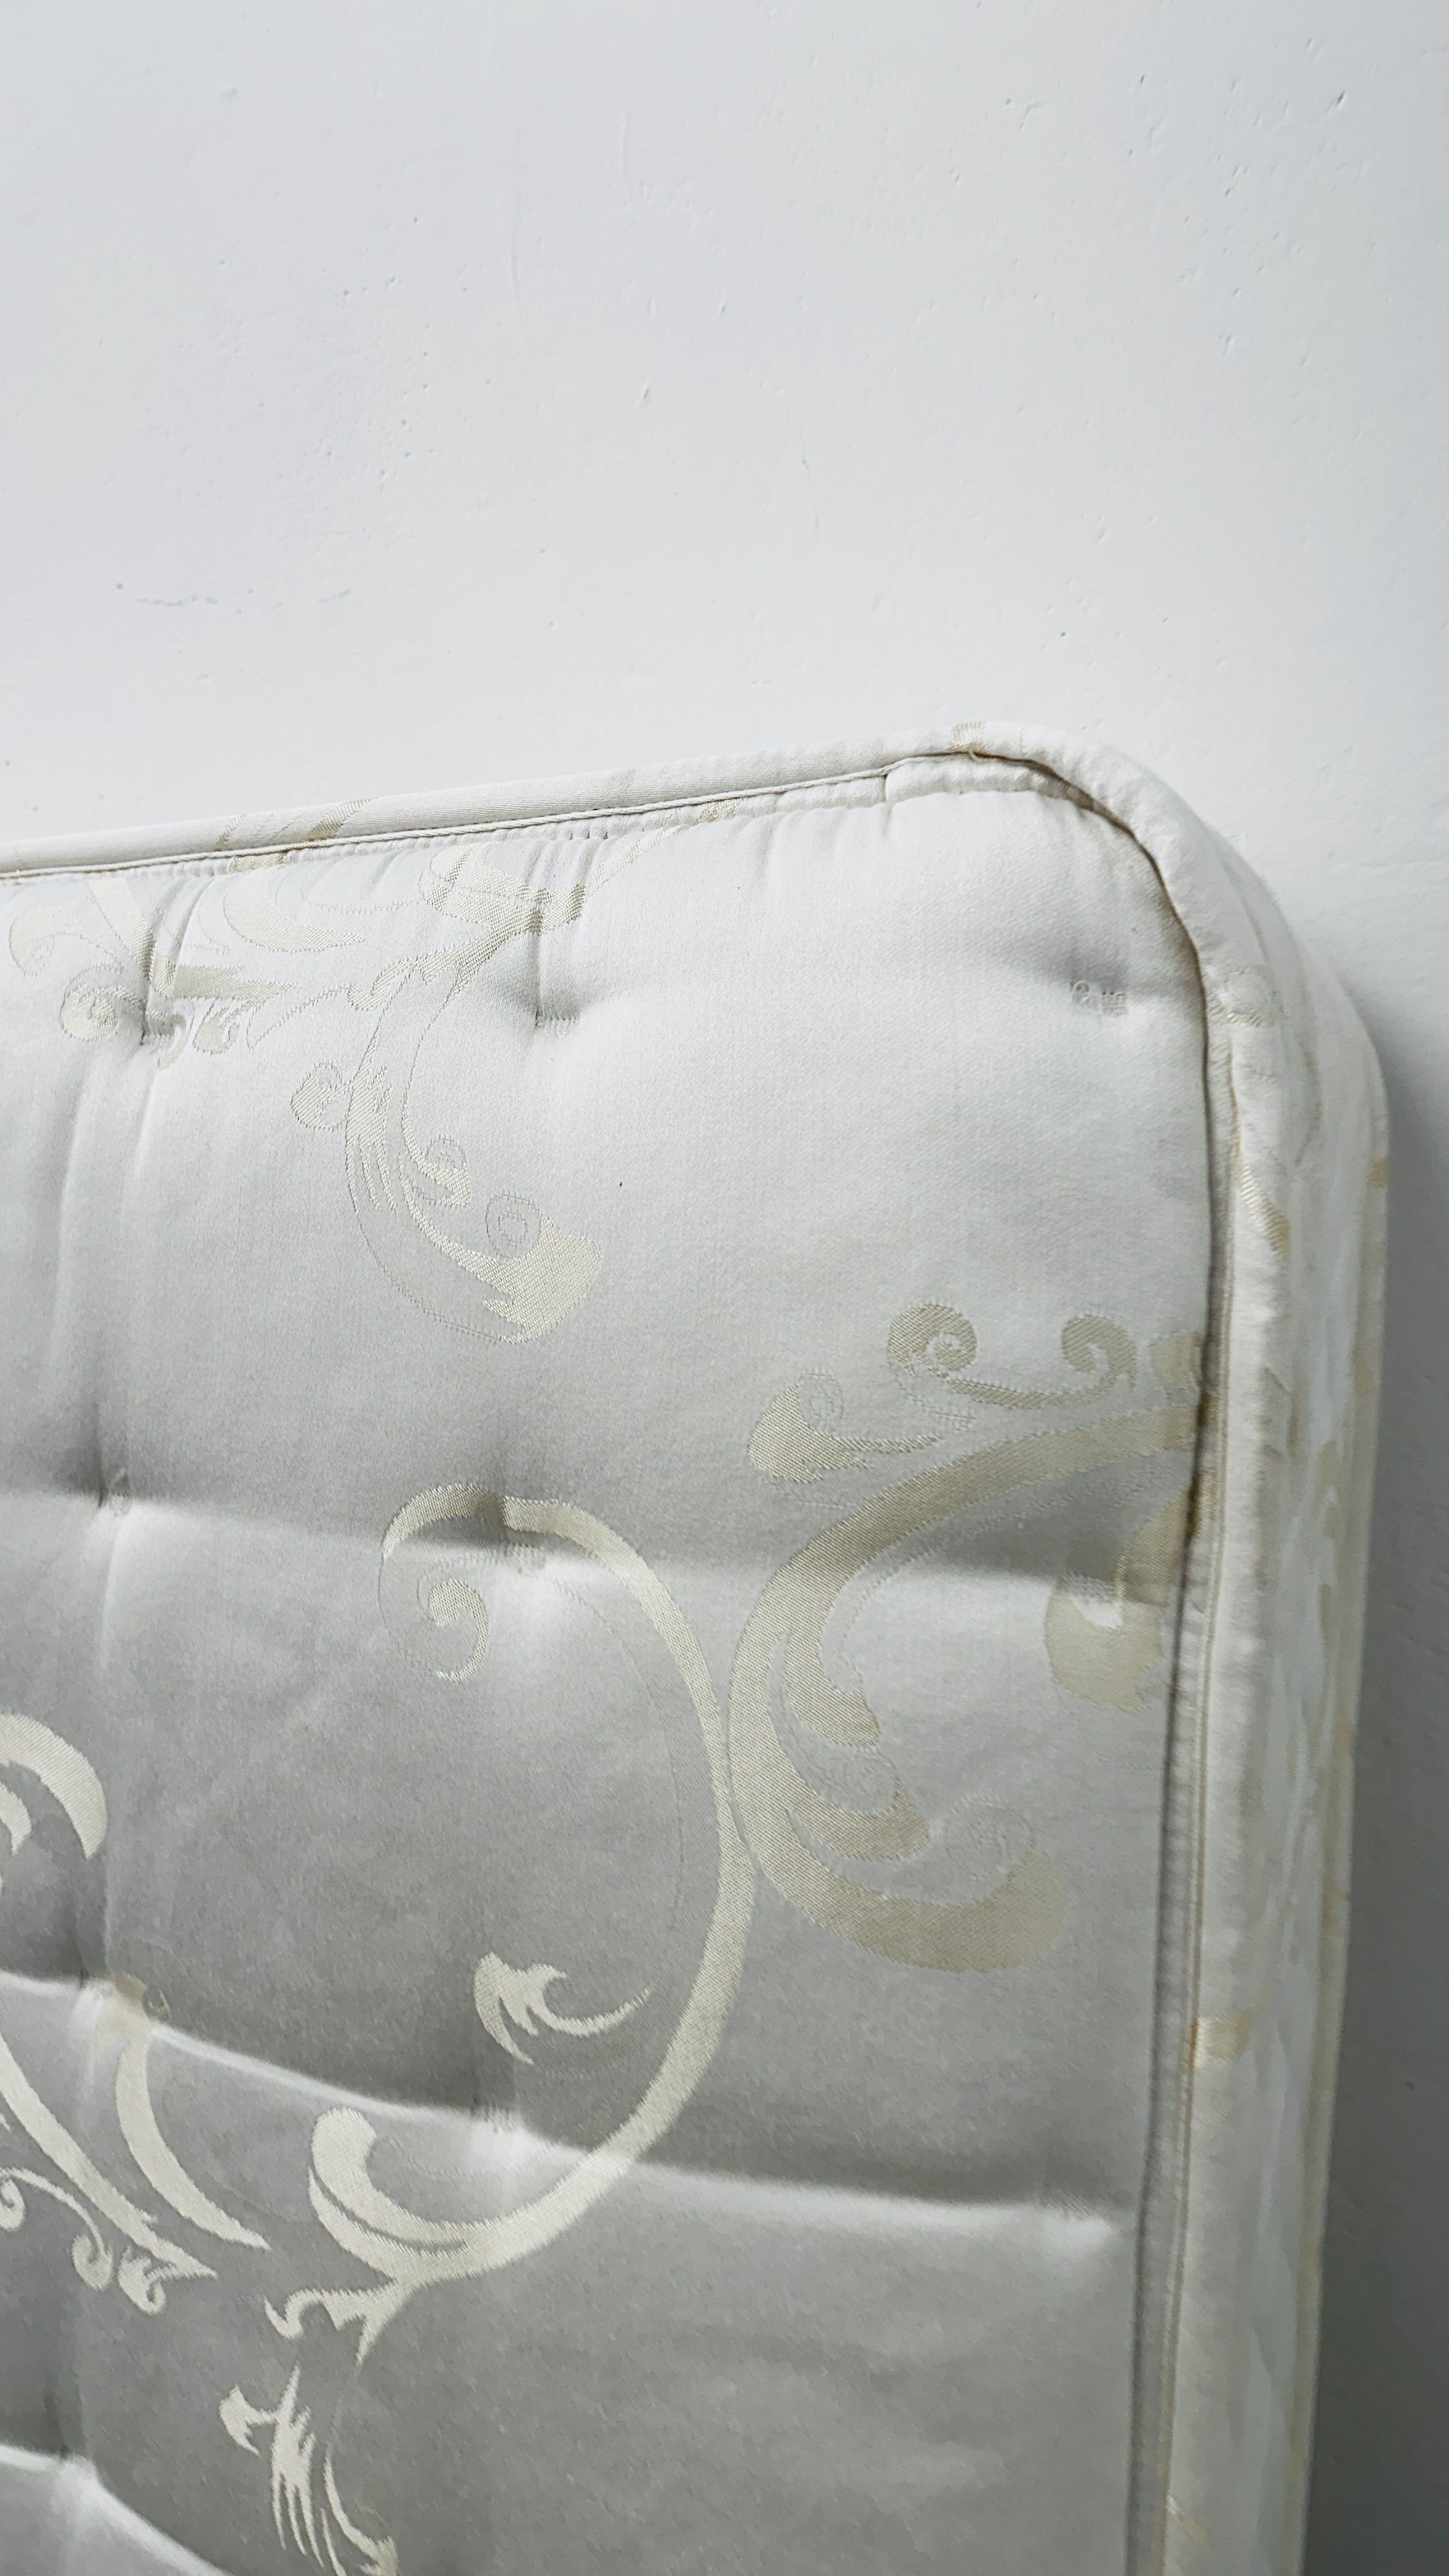 MYERS "AUGUSTA" DEEP QUILTED DOUBLE MATTRESS. - Image 7 of 10